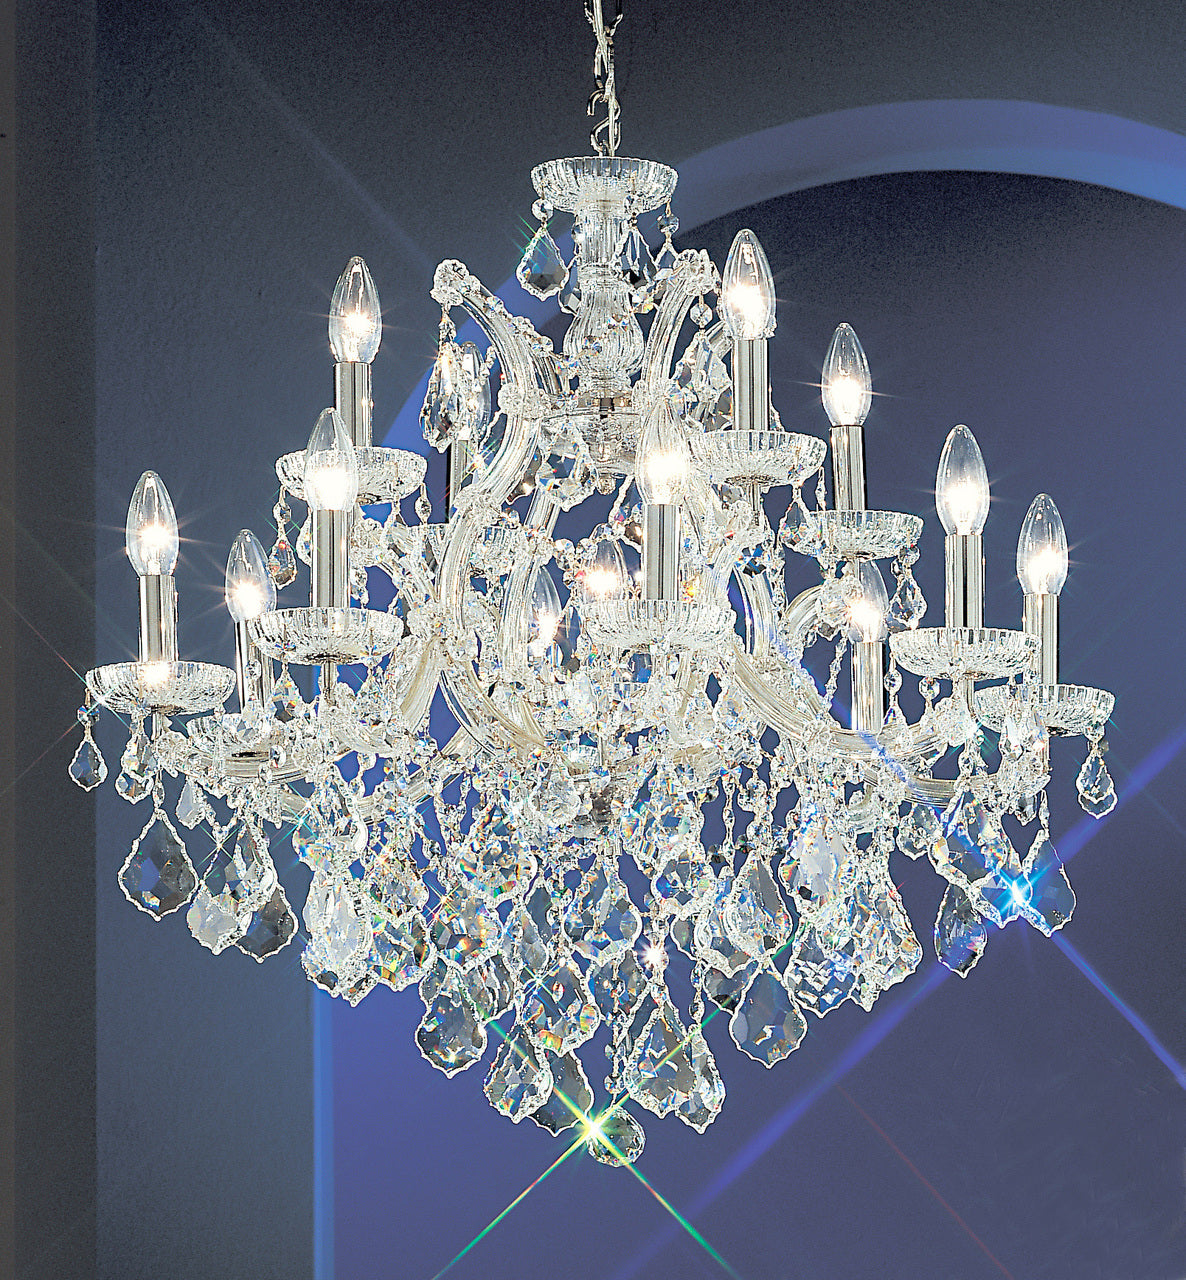 Classic Lighting 8133 OWG SC Maria Theresa Traditional Crystal Chandelier in Olde World Gold (Imported from Italy)